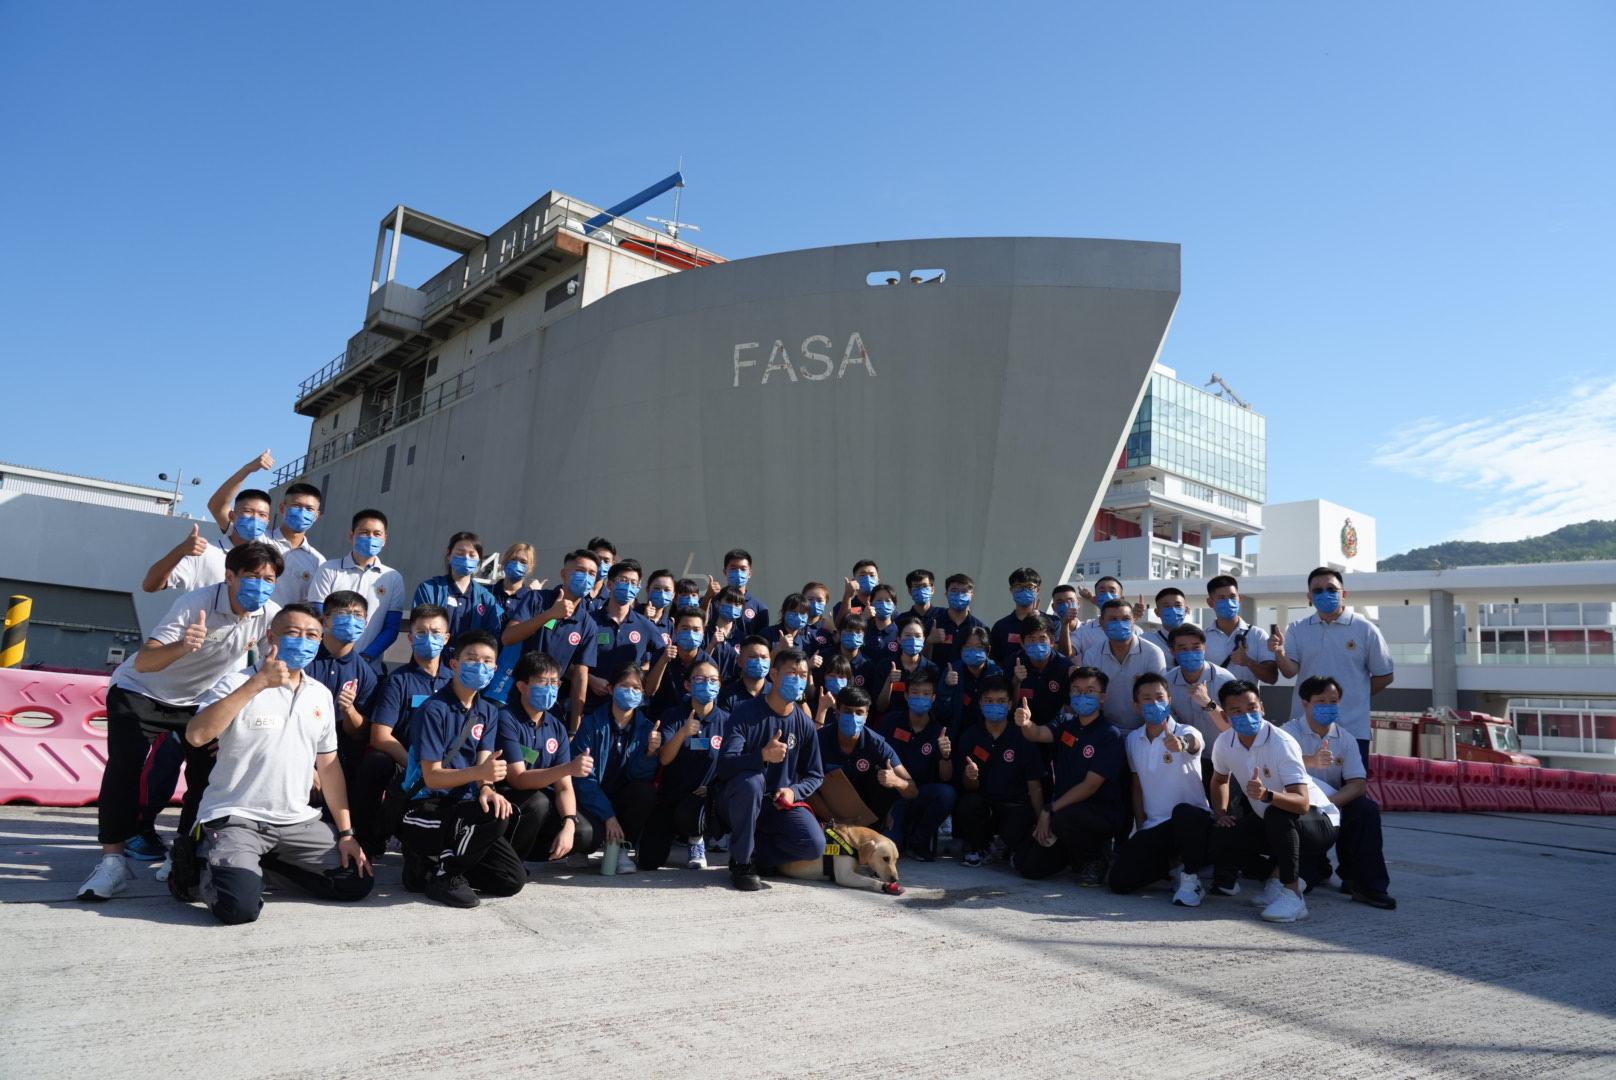 The Security Bureau today (October 22) held a two-day, one-night induction course at the Fire and Ambulance Services Academy (FASA) in Tseung Kwan O for members of the Security Bureau Youth Uniformed Group Leaders Forum. Photo shows members of the Leaders Forum taking a group photo at the FASA.